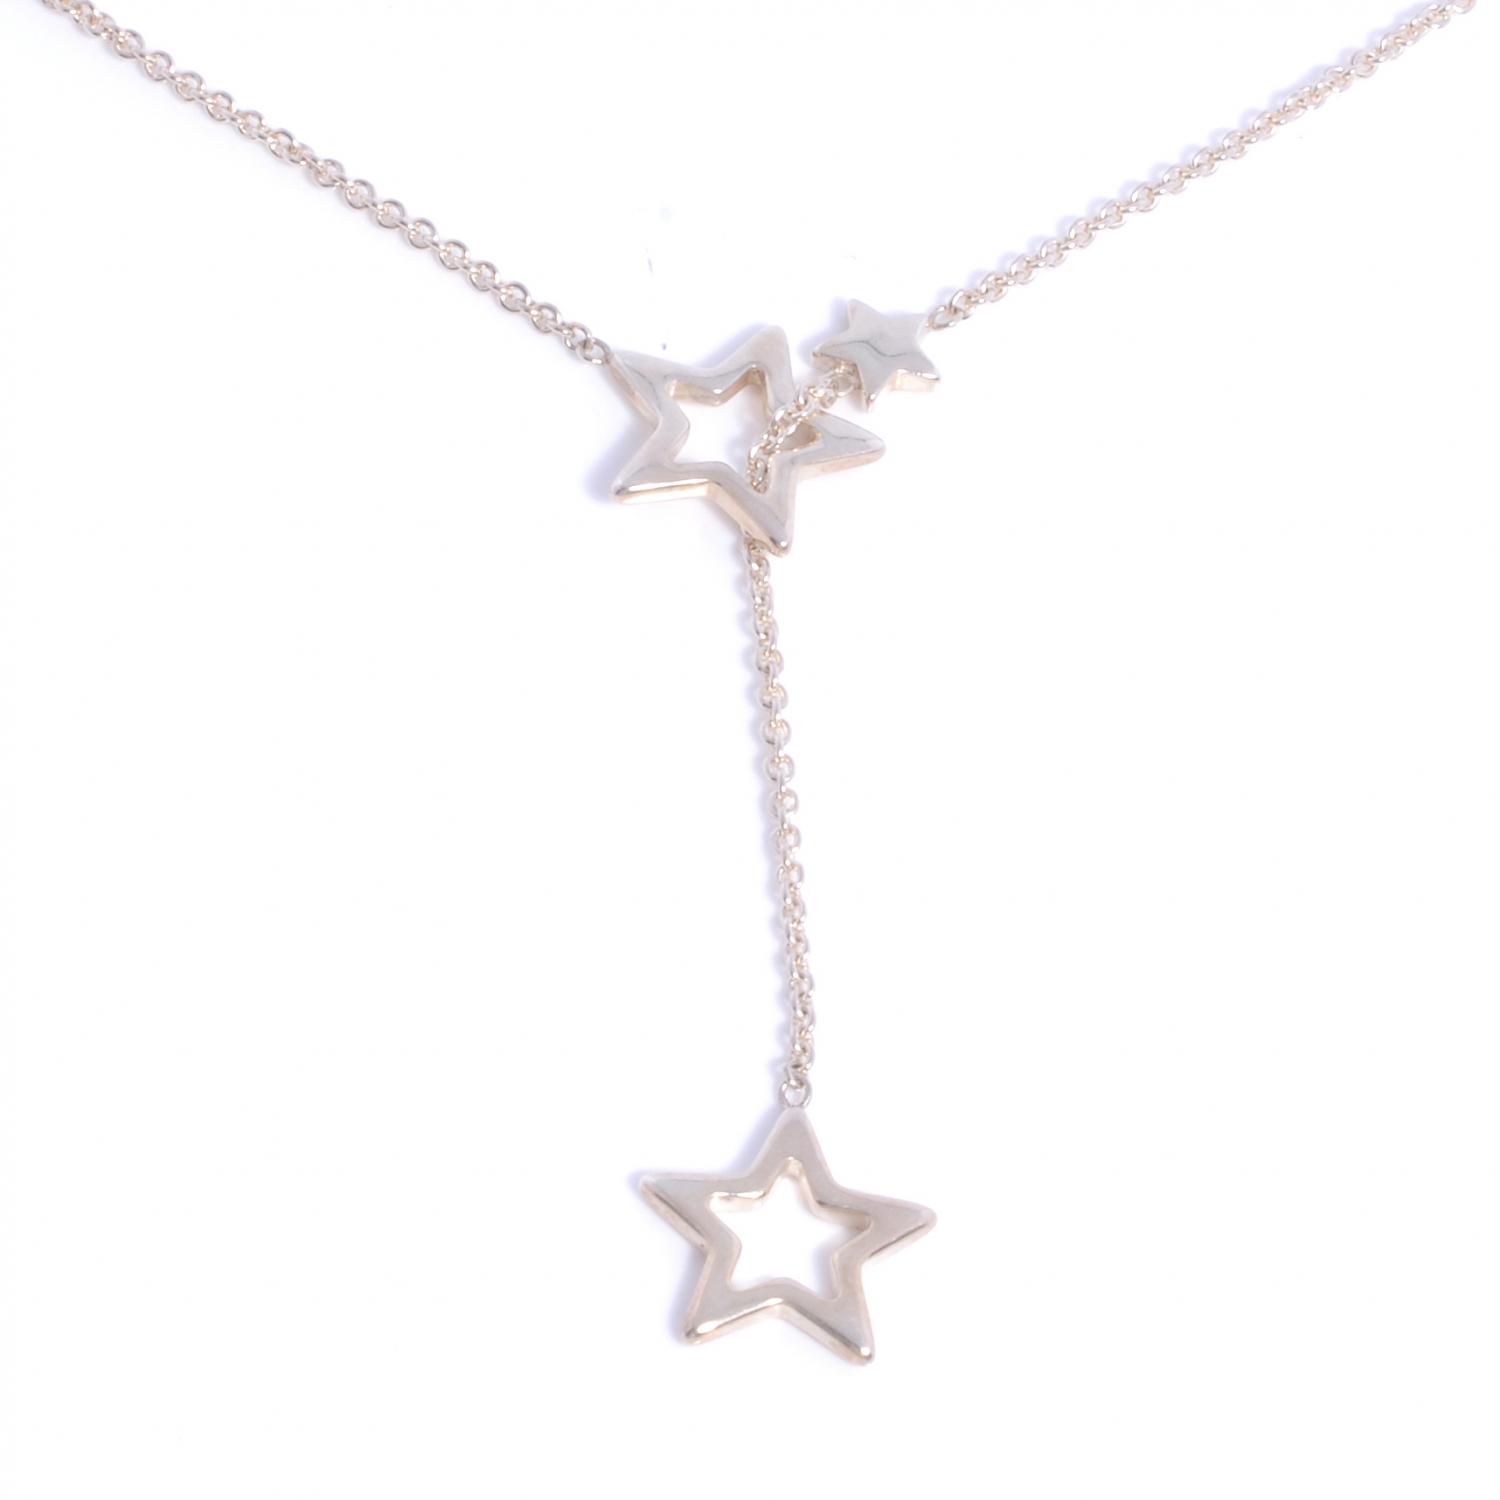 Tiffany Sterling Silver Star Lariat Necklace 40150